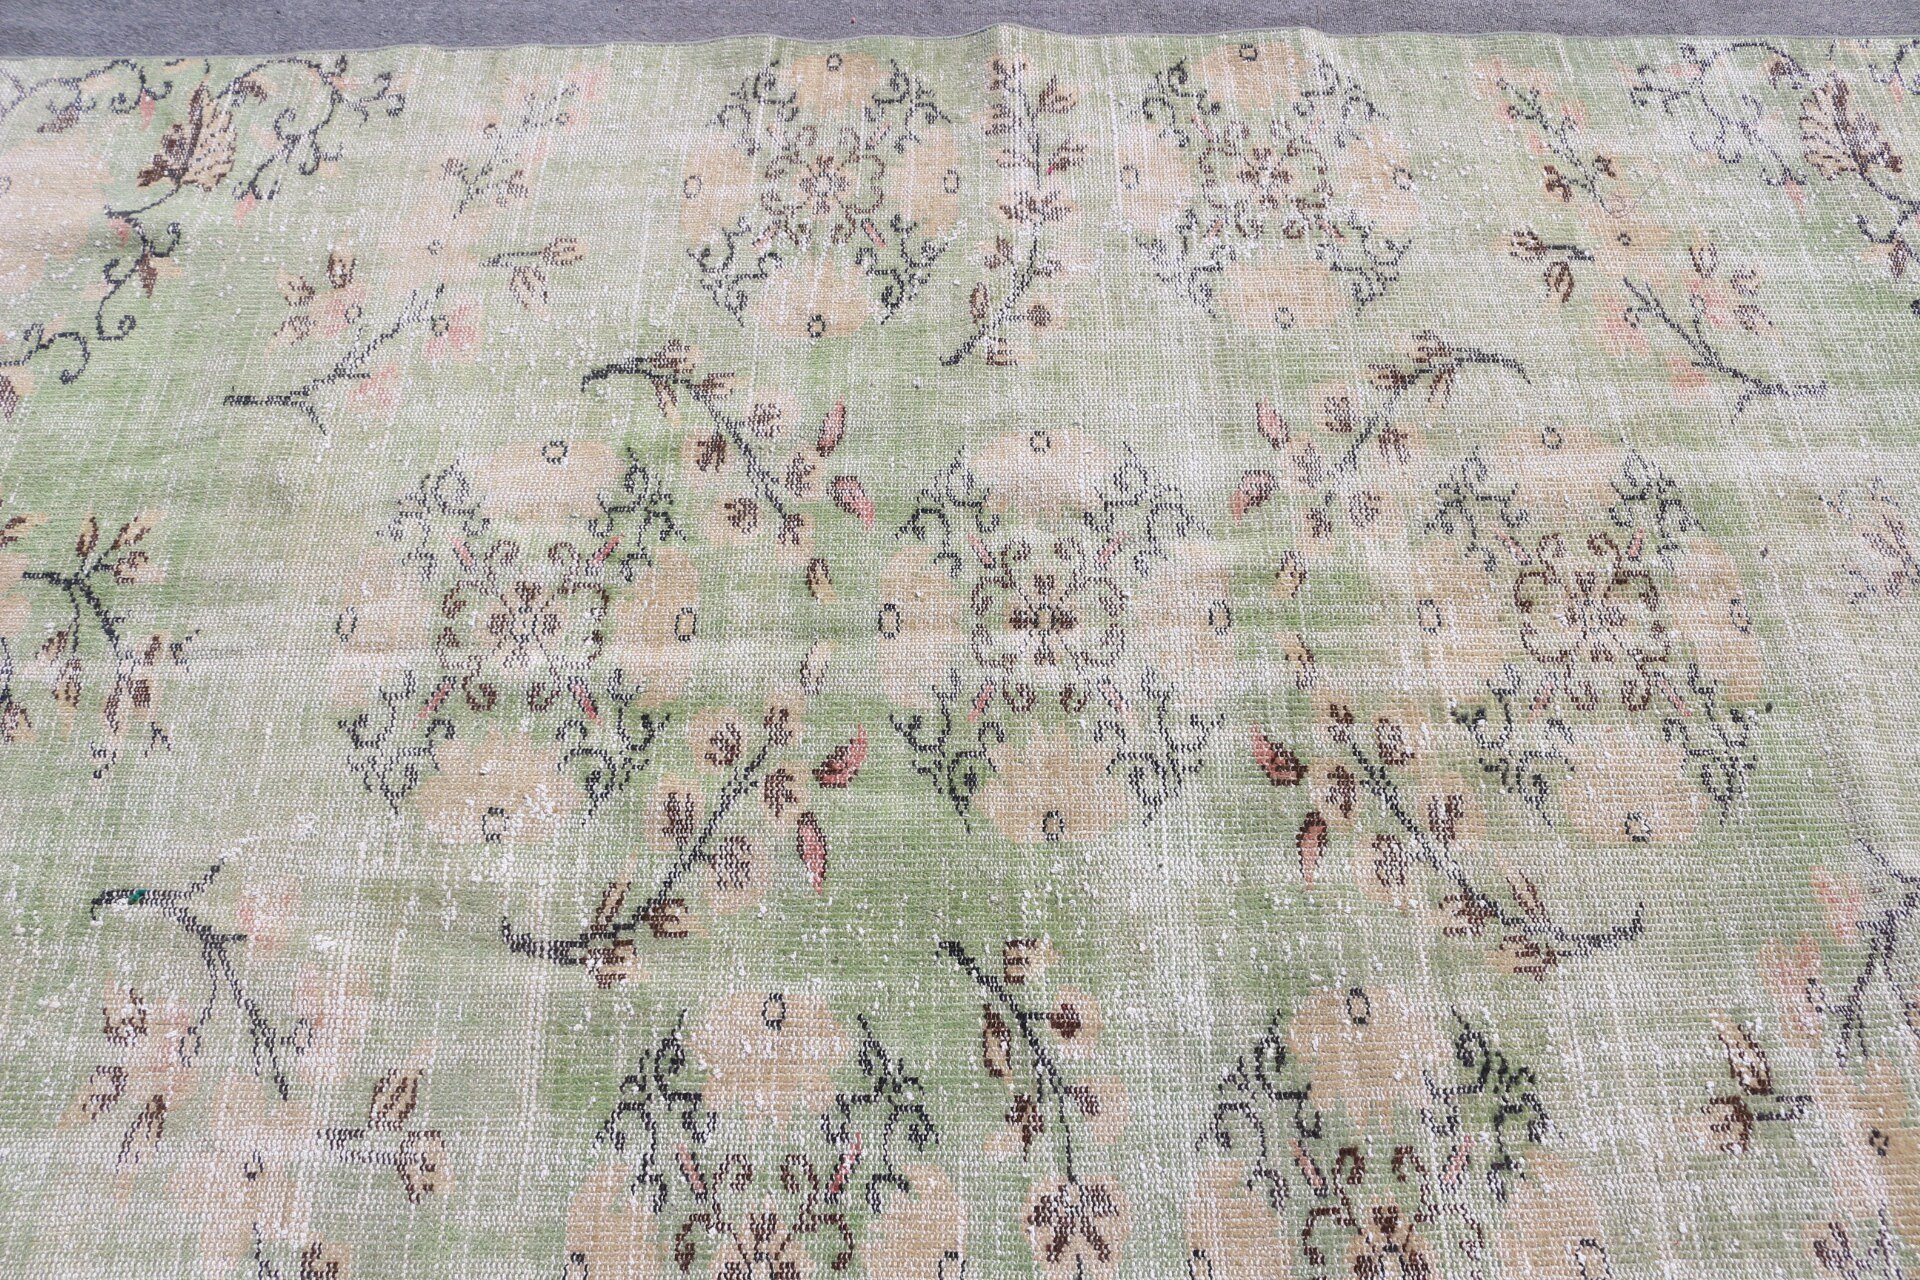 4.9x8.7 ft Large Rug, Cool Rug, Turkish Rugs, Abstract Rug, Dining Room Rugs, Vintage Rugs, Home Decor Rugs, Green Antique Rug, Bedroom Rug